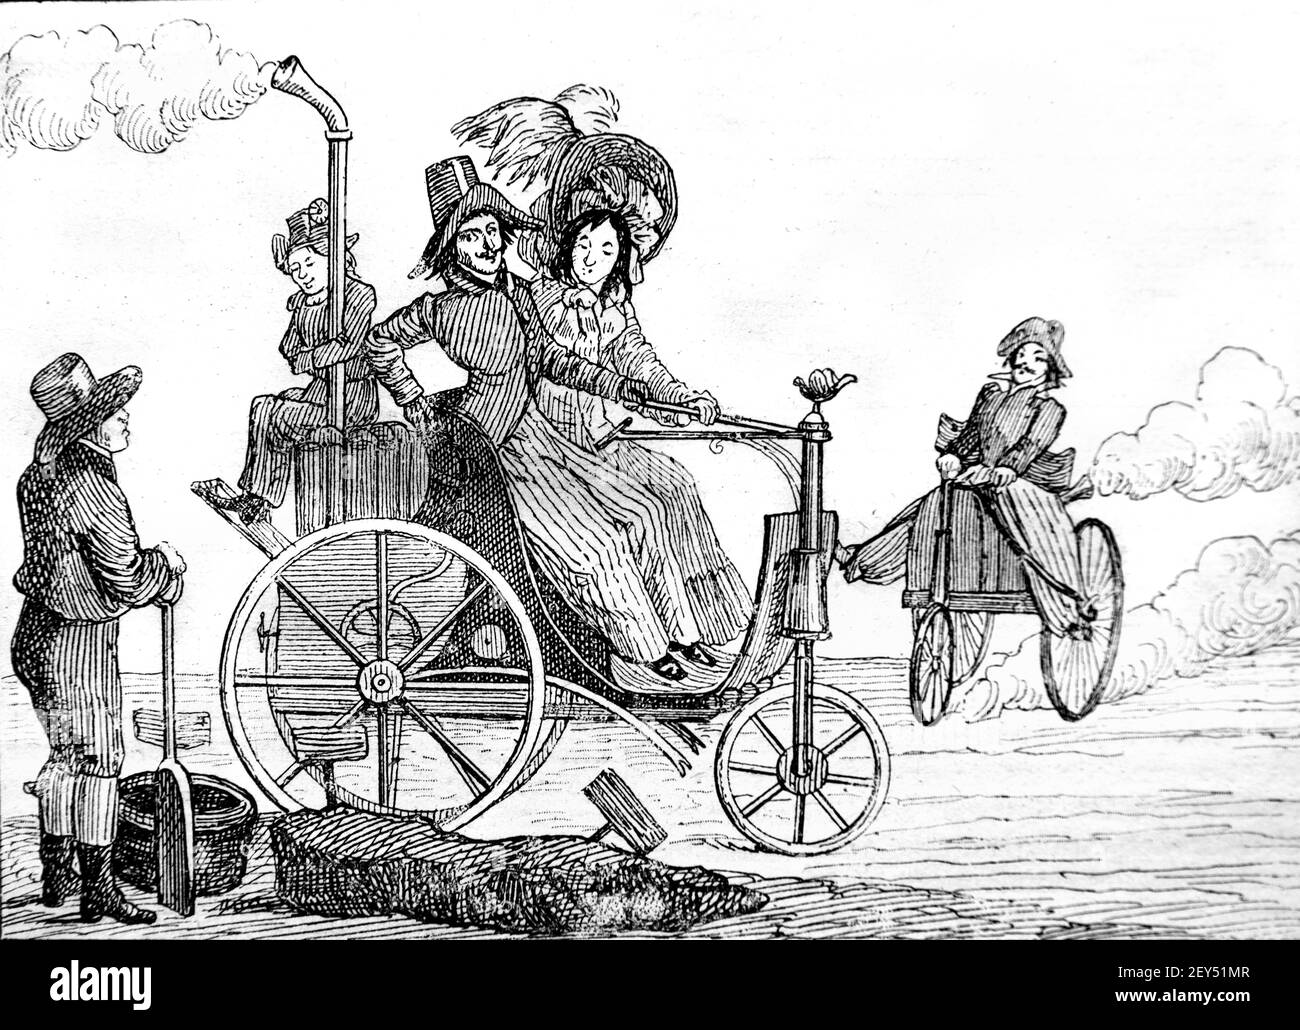 Imaginary or Futurist Steam-Powered Tricycle or Trike 1896 Vintage Illustration or Old Engraving Stock Photo